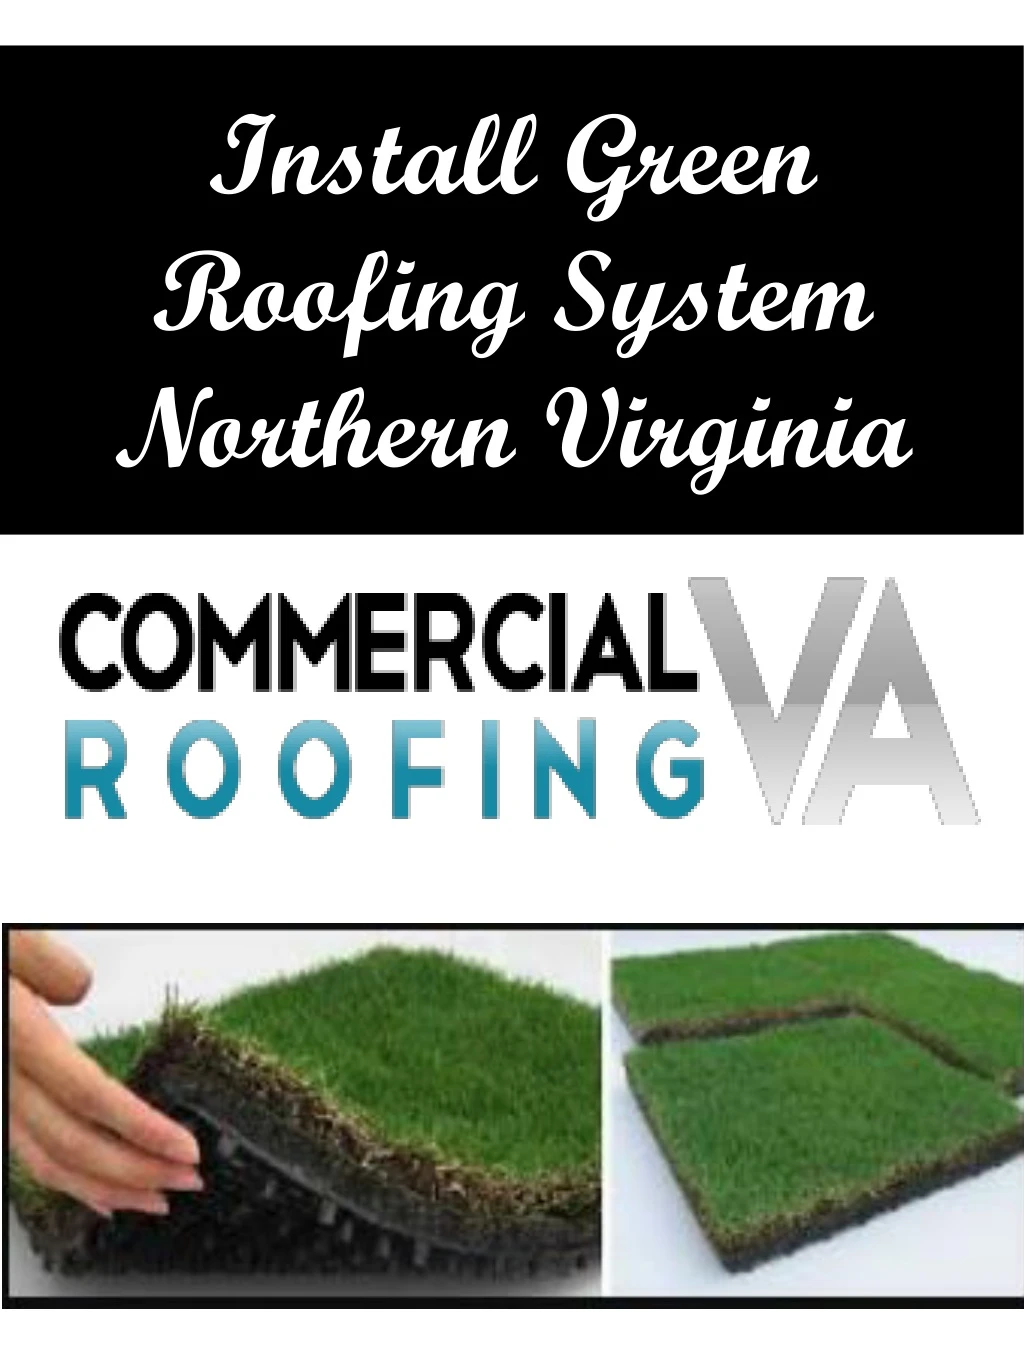 install green roofing system northern virginia